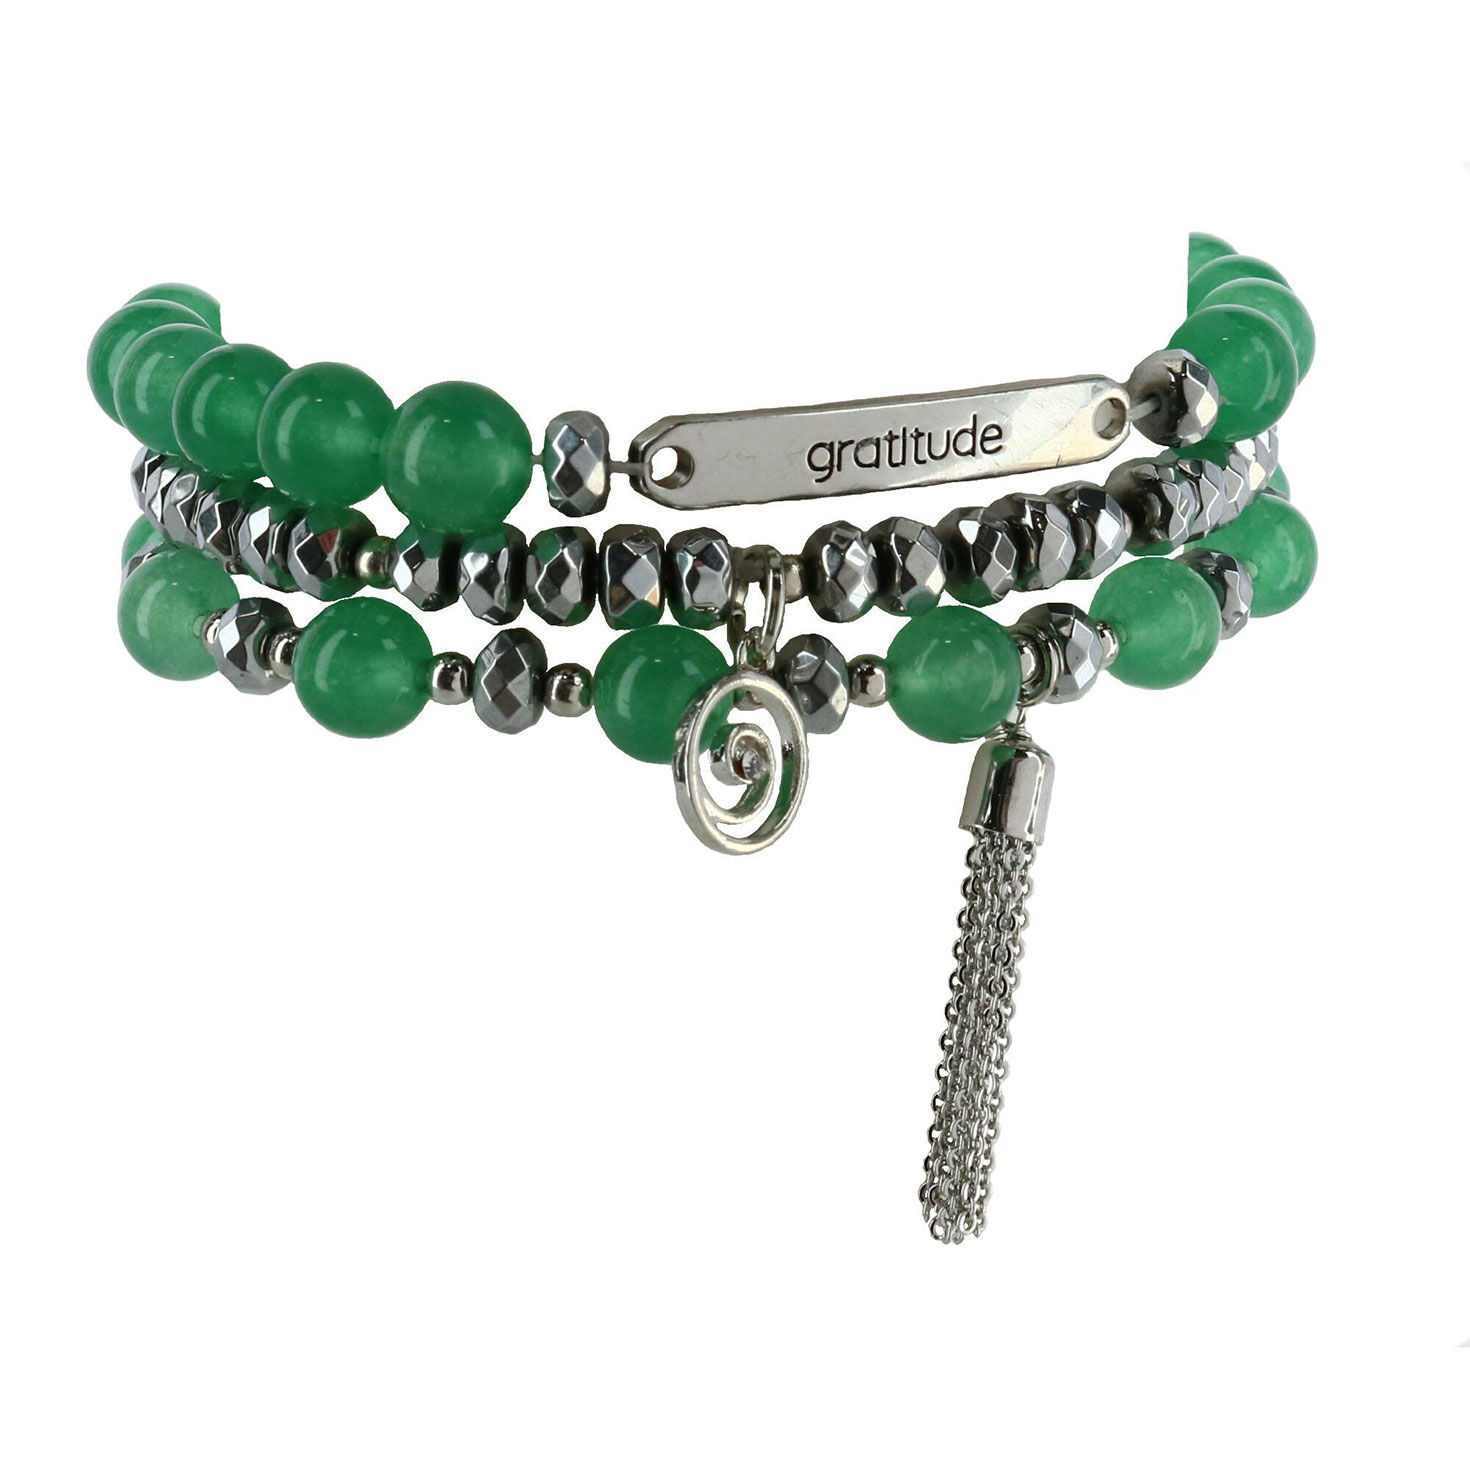 Bead Bracelet with Spacers and Accent Charms Green Beads with Tree of Life Charm